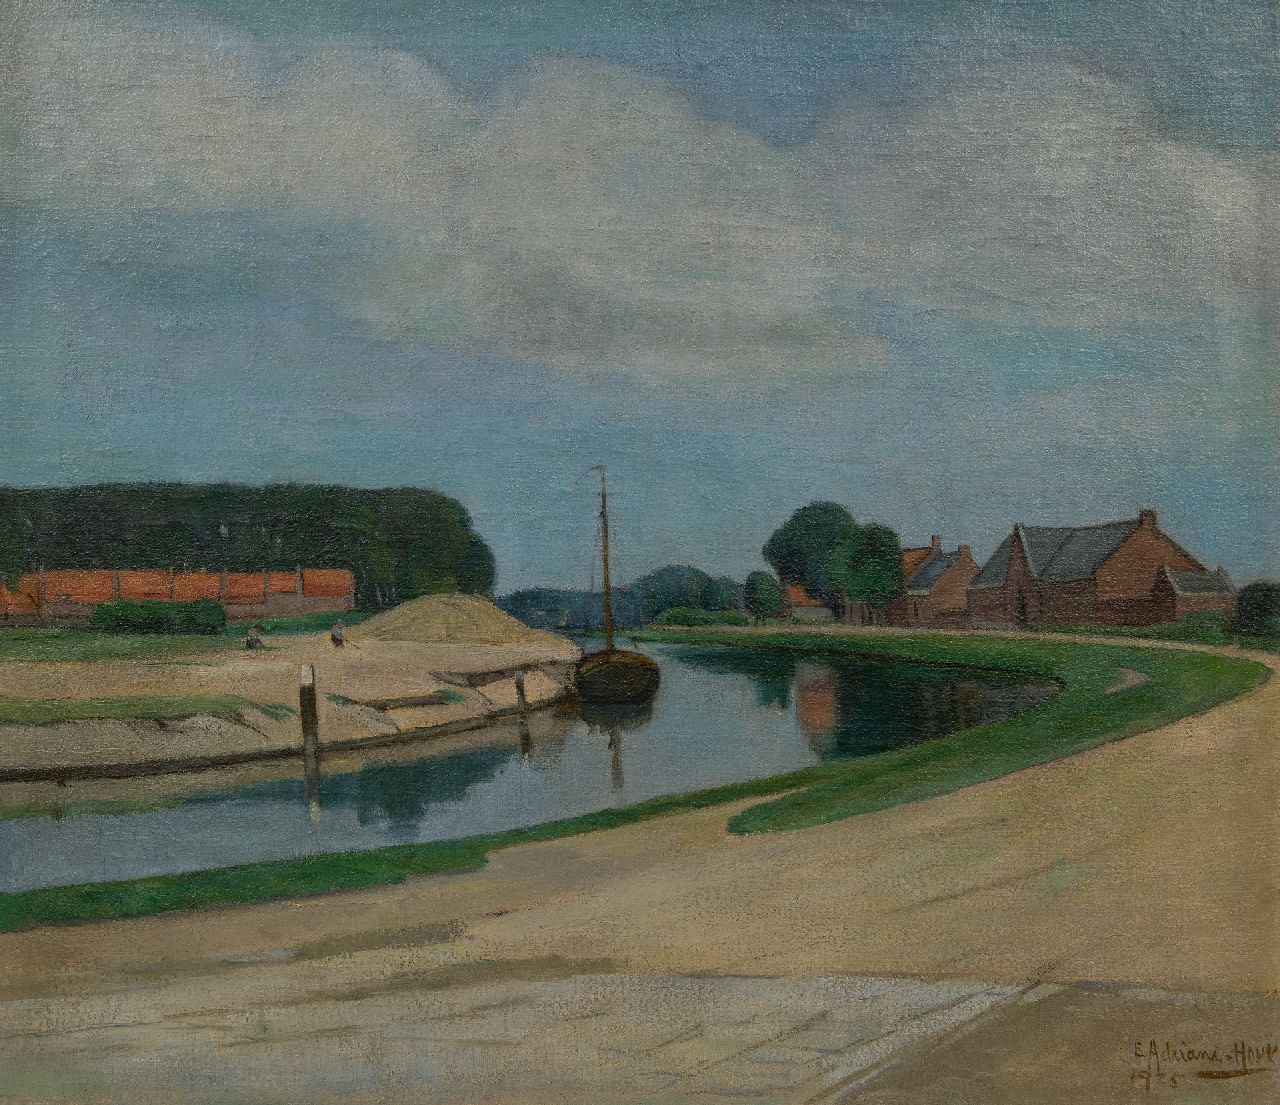 Adriani-Hovy E.M.H.  | 'Elisabeth' Marie Hendrika Adriani-Hovy | Paintings offered for sale | The river Vecht near Oud-Zuilen, oil on canvas 70.2 x 80.0 cm, signed l.r. and dated 1925